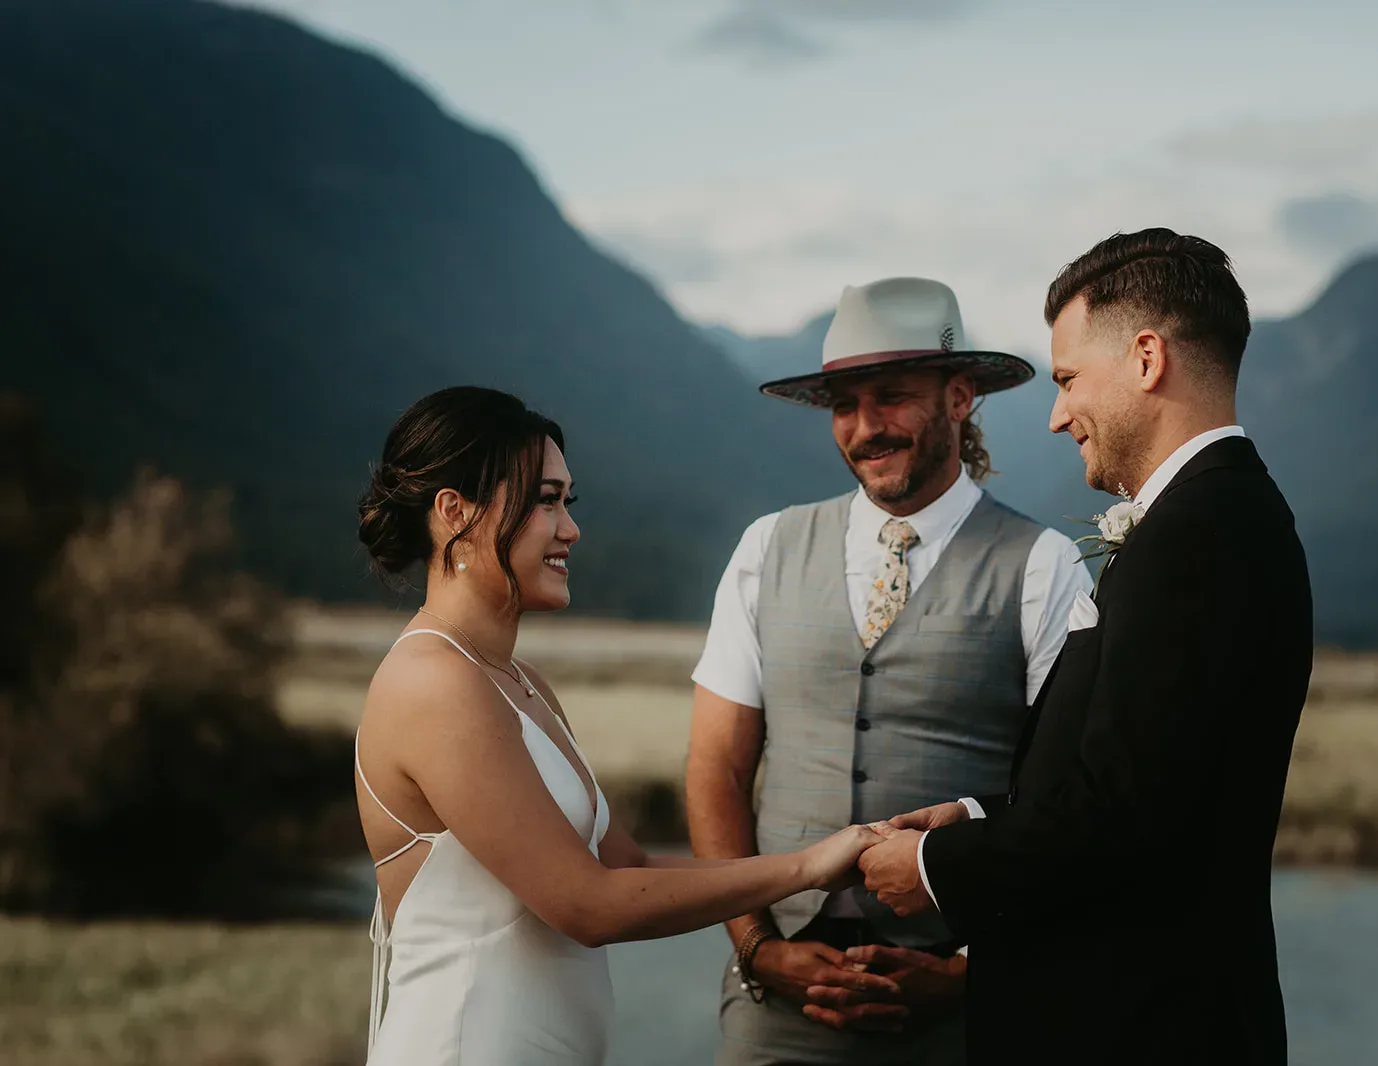 timeline for planning a wedding ceremony, young hip and married vancouver elopement